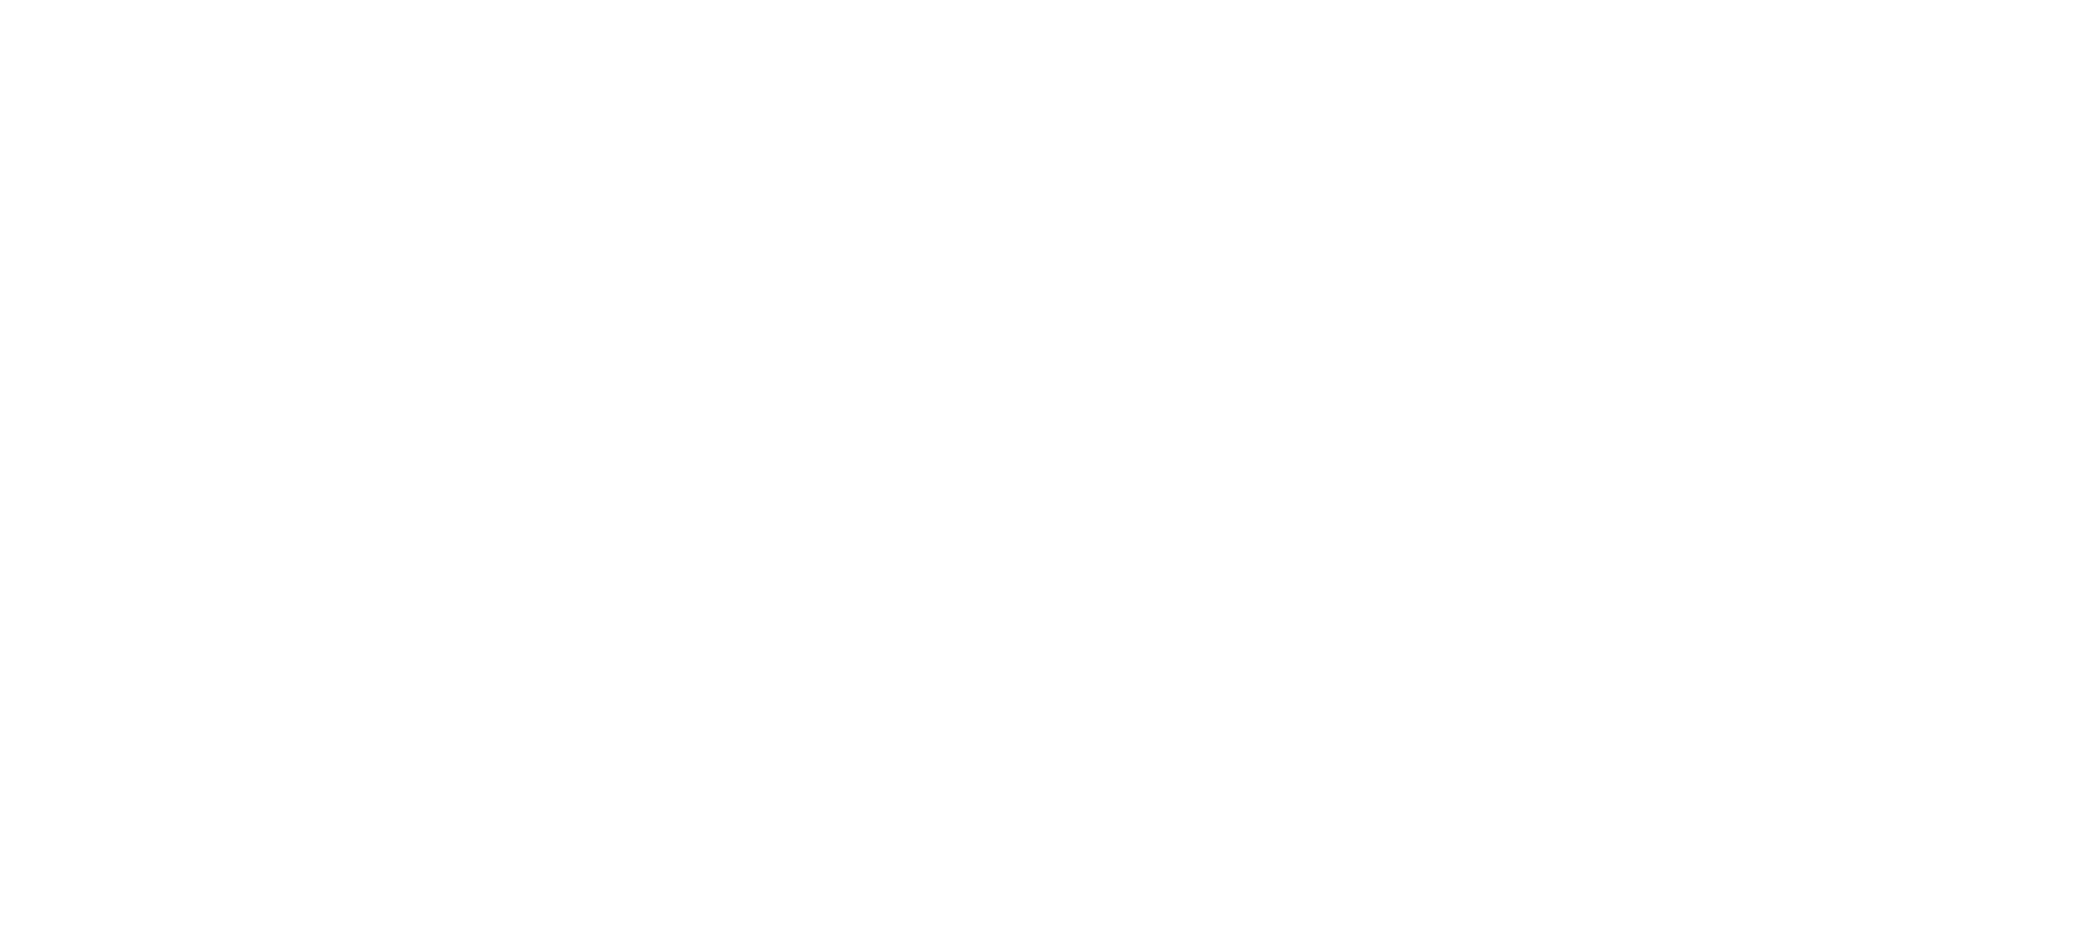 Dynamite Pictures Post Production logo